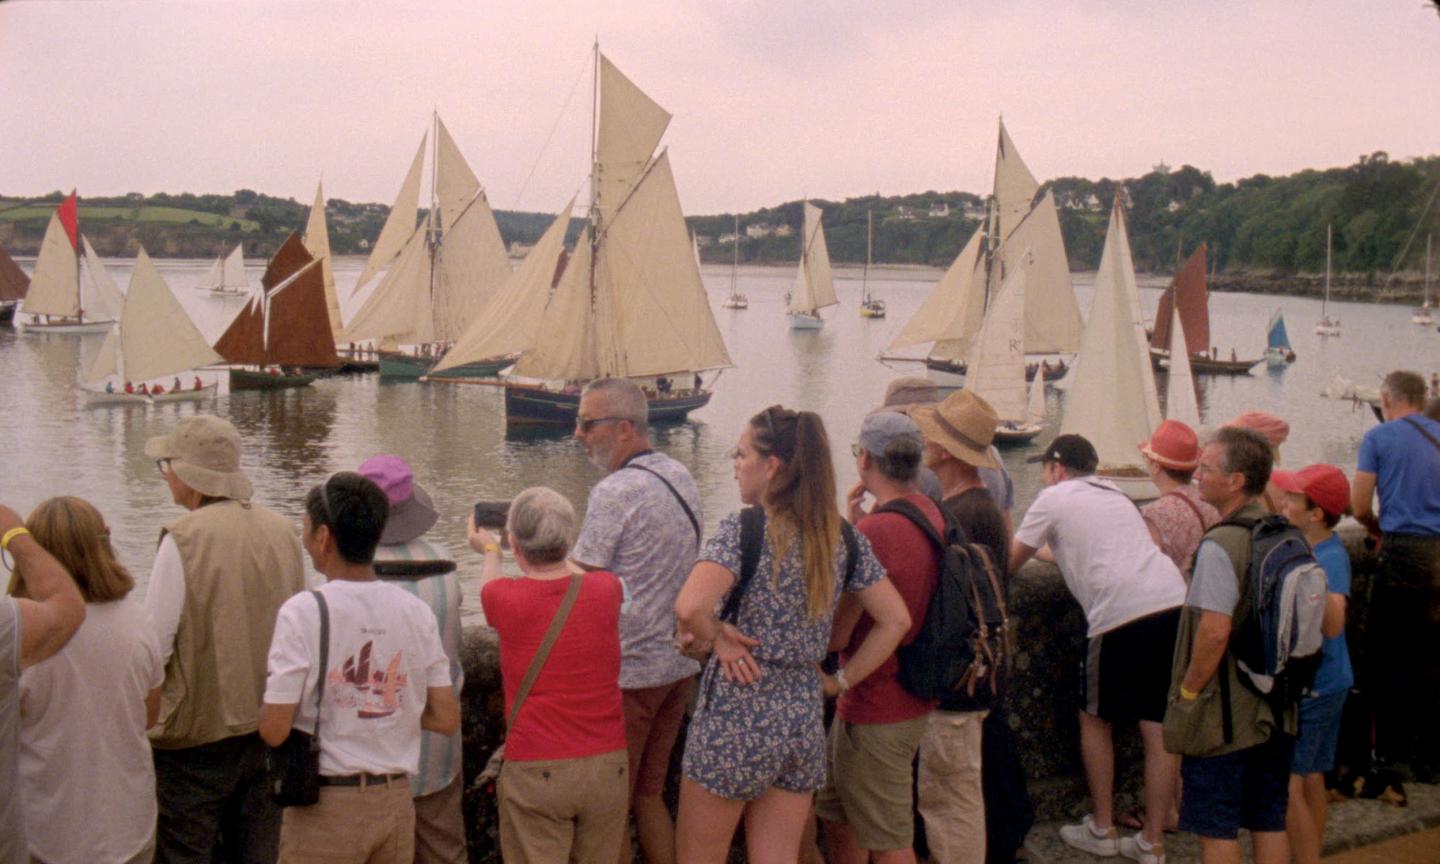 In the foreground, a crowd of people on land are looking out onto a number of small sailing vessels, with their sails up, a mix of red and white. There are hills, trees and fields in the background.